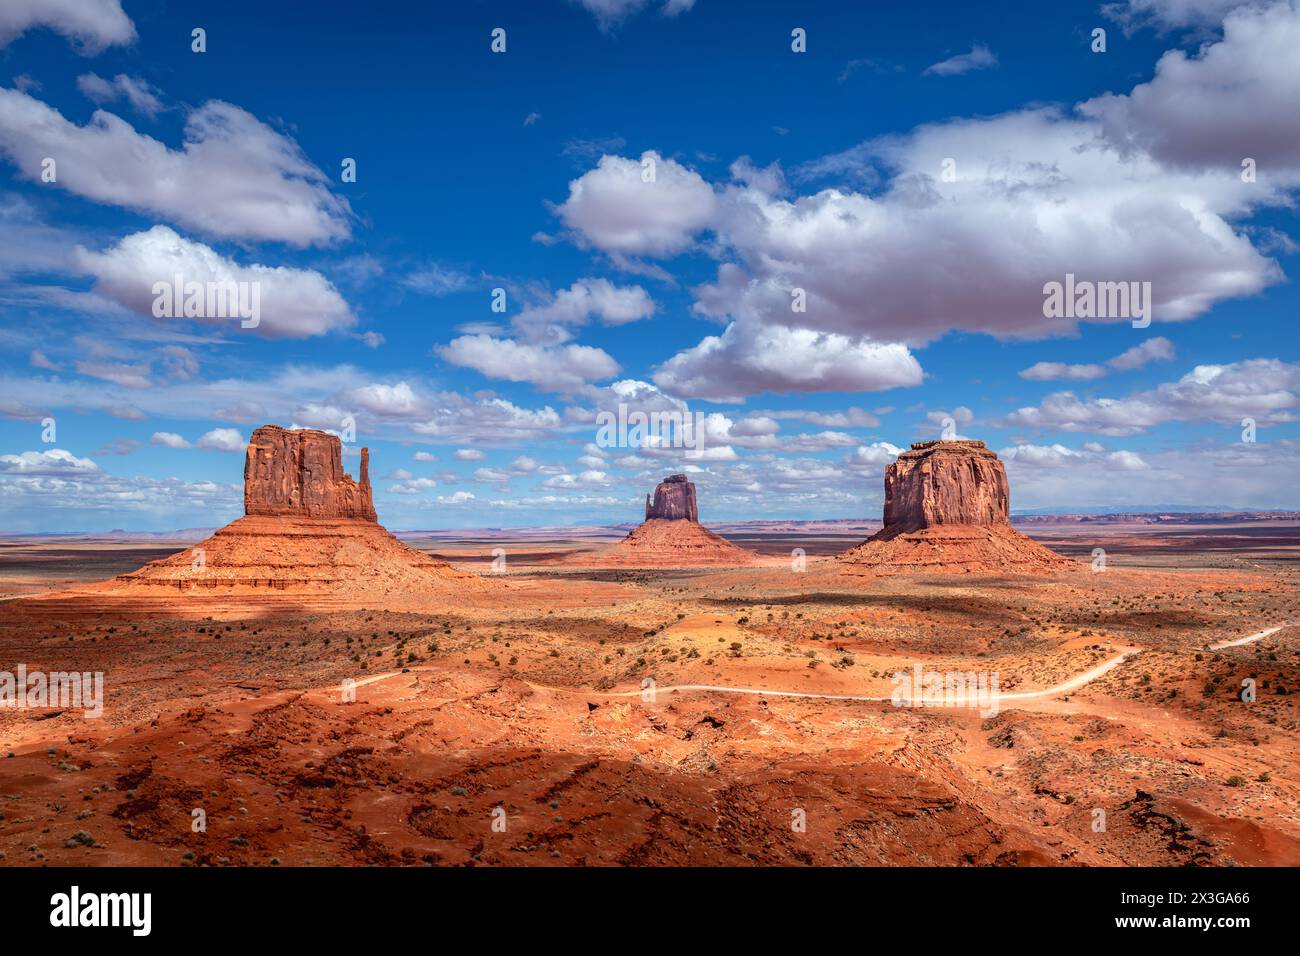 Scenic view of the magnificent buttes at Monument Valley during a bright, vibrant spring day. Stock Photo